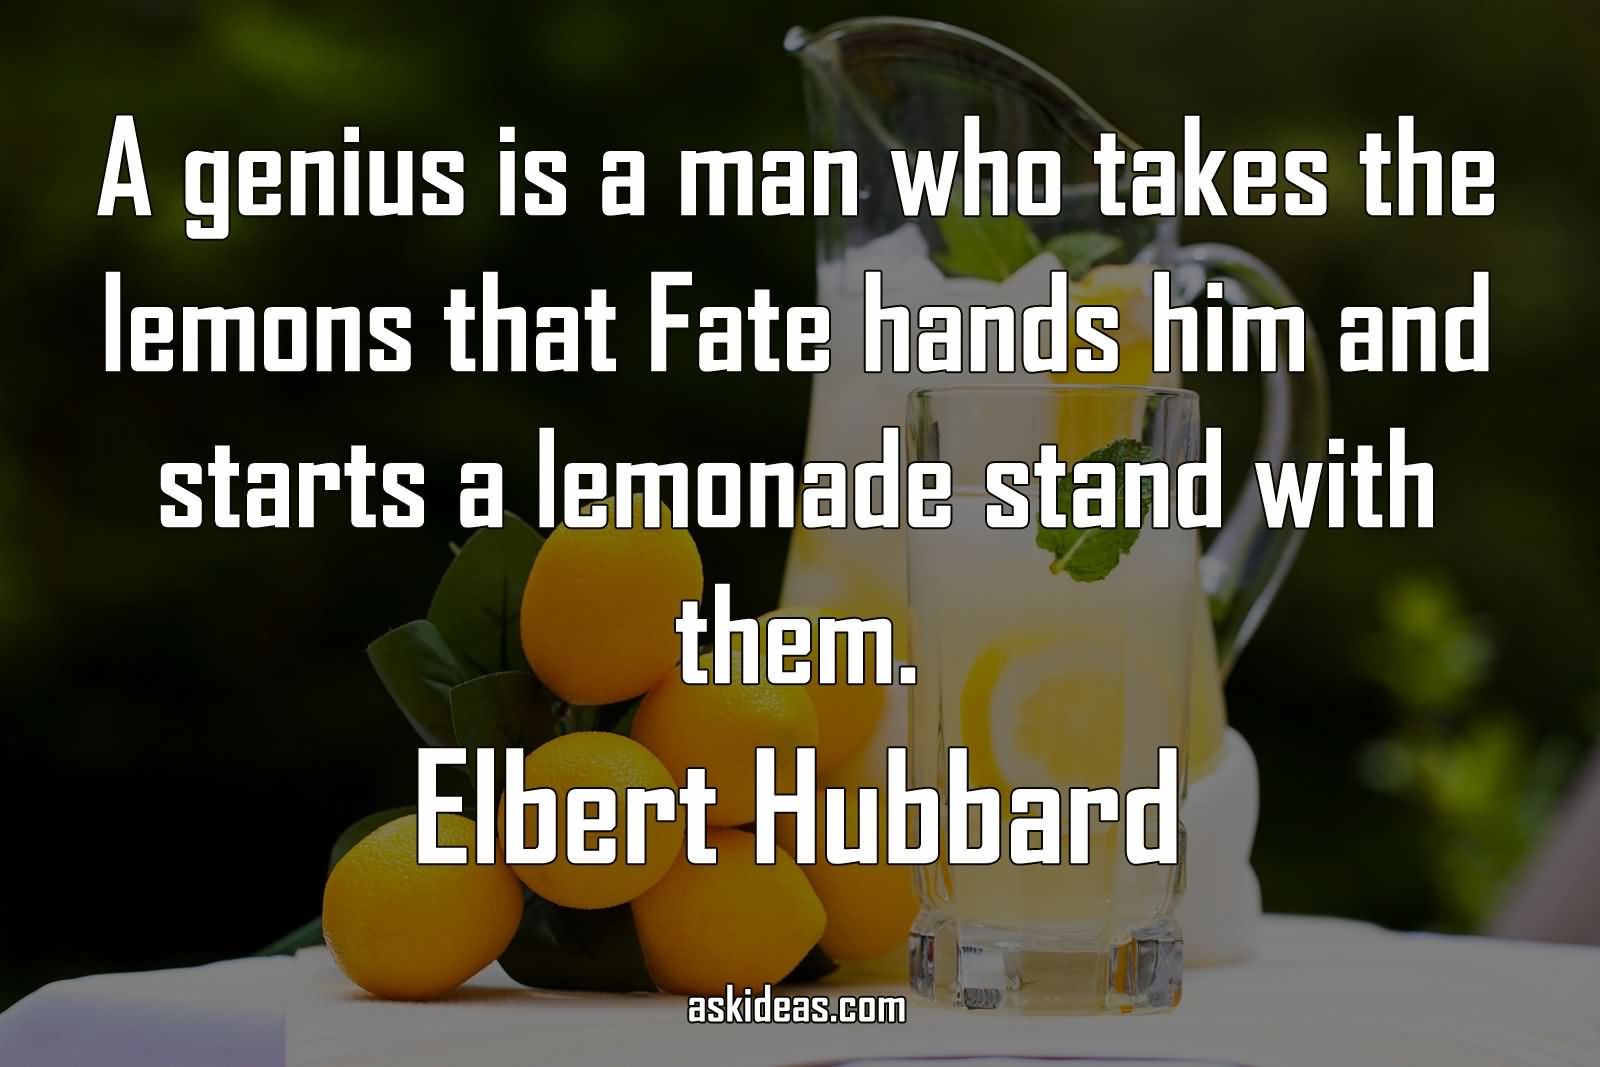 A genius is a man who takes the lemons that Fate hands him and starts a lemonade stand with them